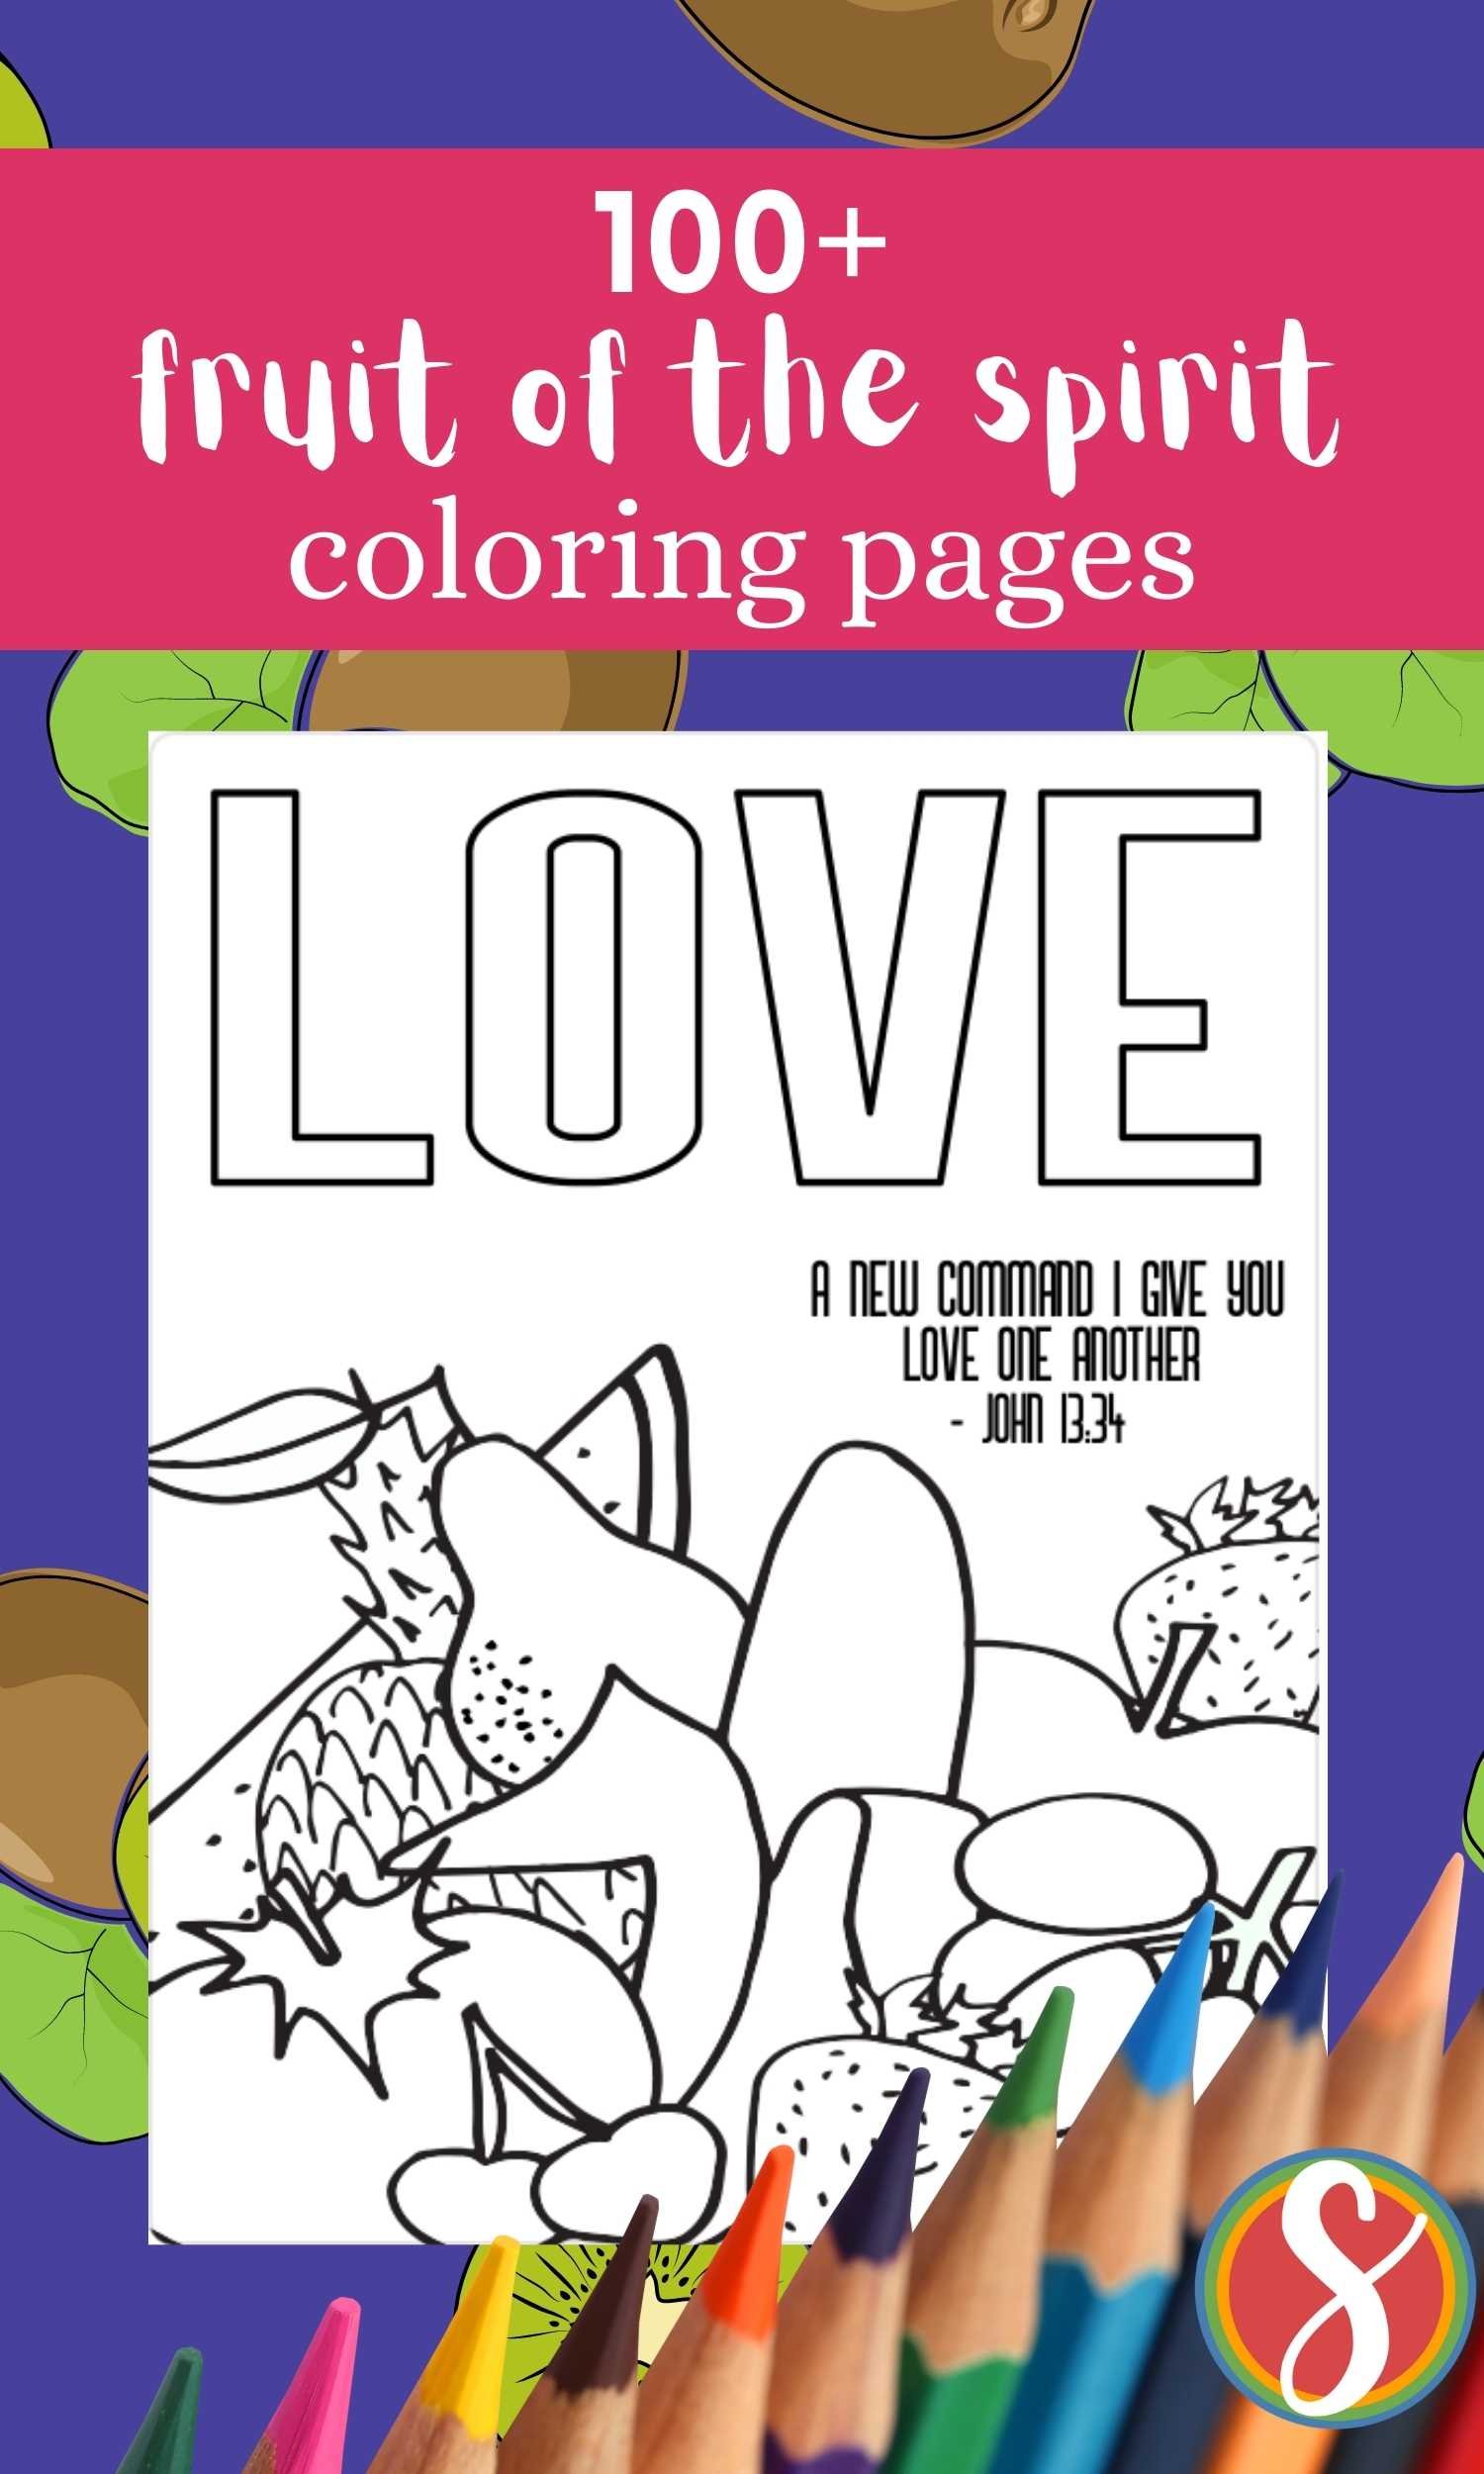 fruit of the spirit coloring page with love, fruit to color, and a bible verse